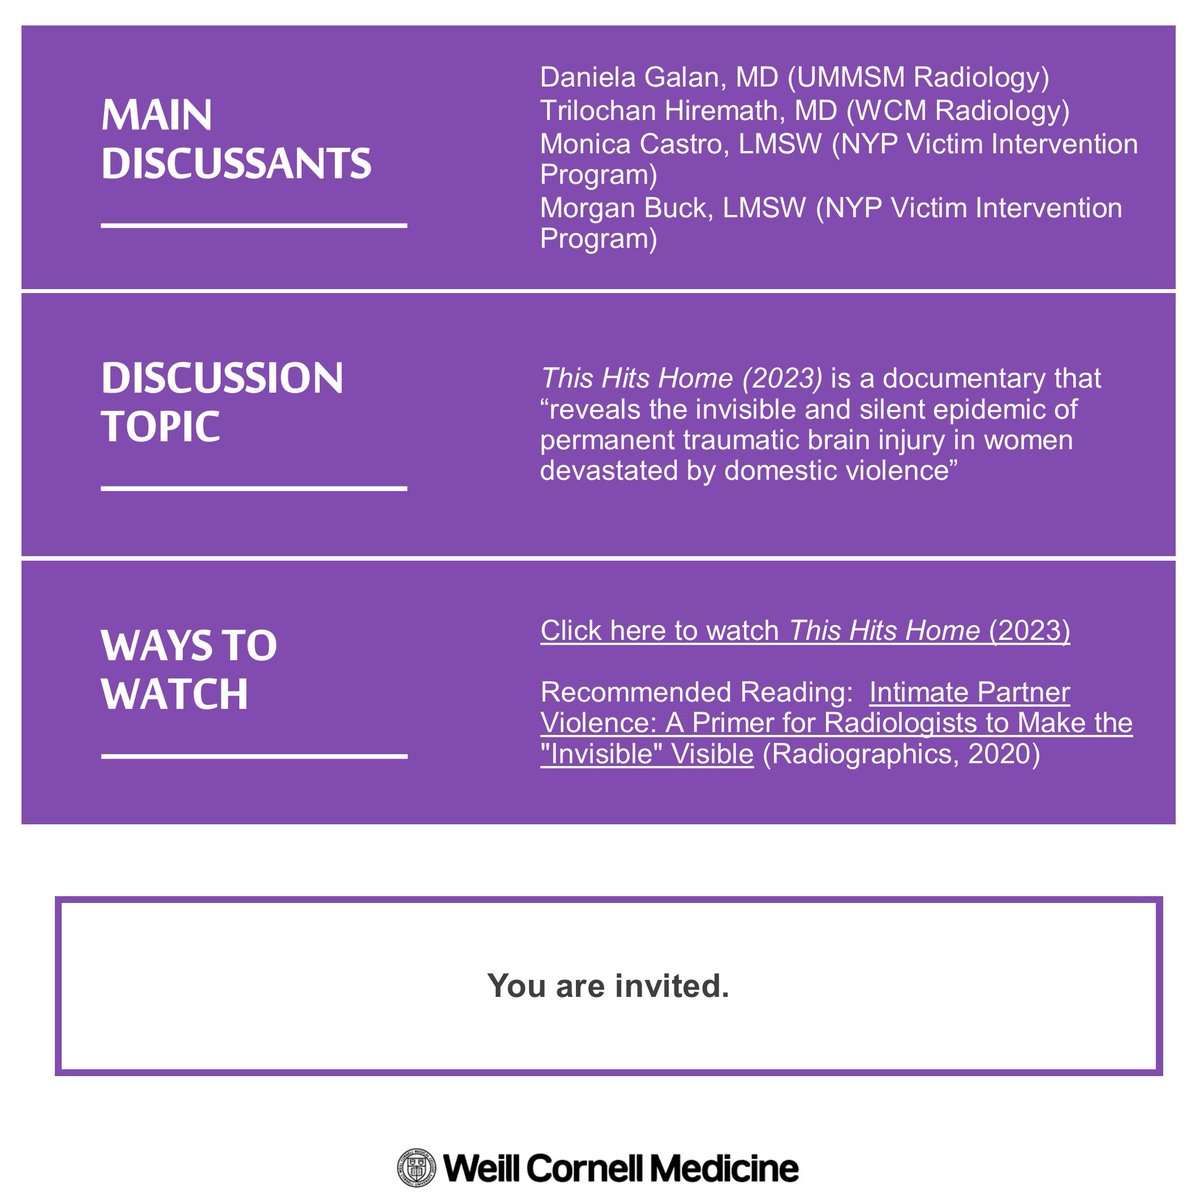 Join @WCMRadiology as we tackle intimate partner violence and domestic abuse. With expert insights & essential resources, let's empower radiologists & healthcare workers to address this critical issue. Register here: bit.ly/3TEk5Oy @WCMRadRes @WCMDiversity @KemiMDRad